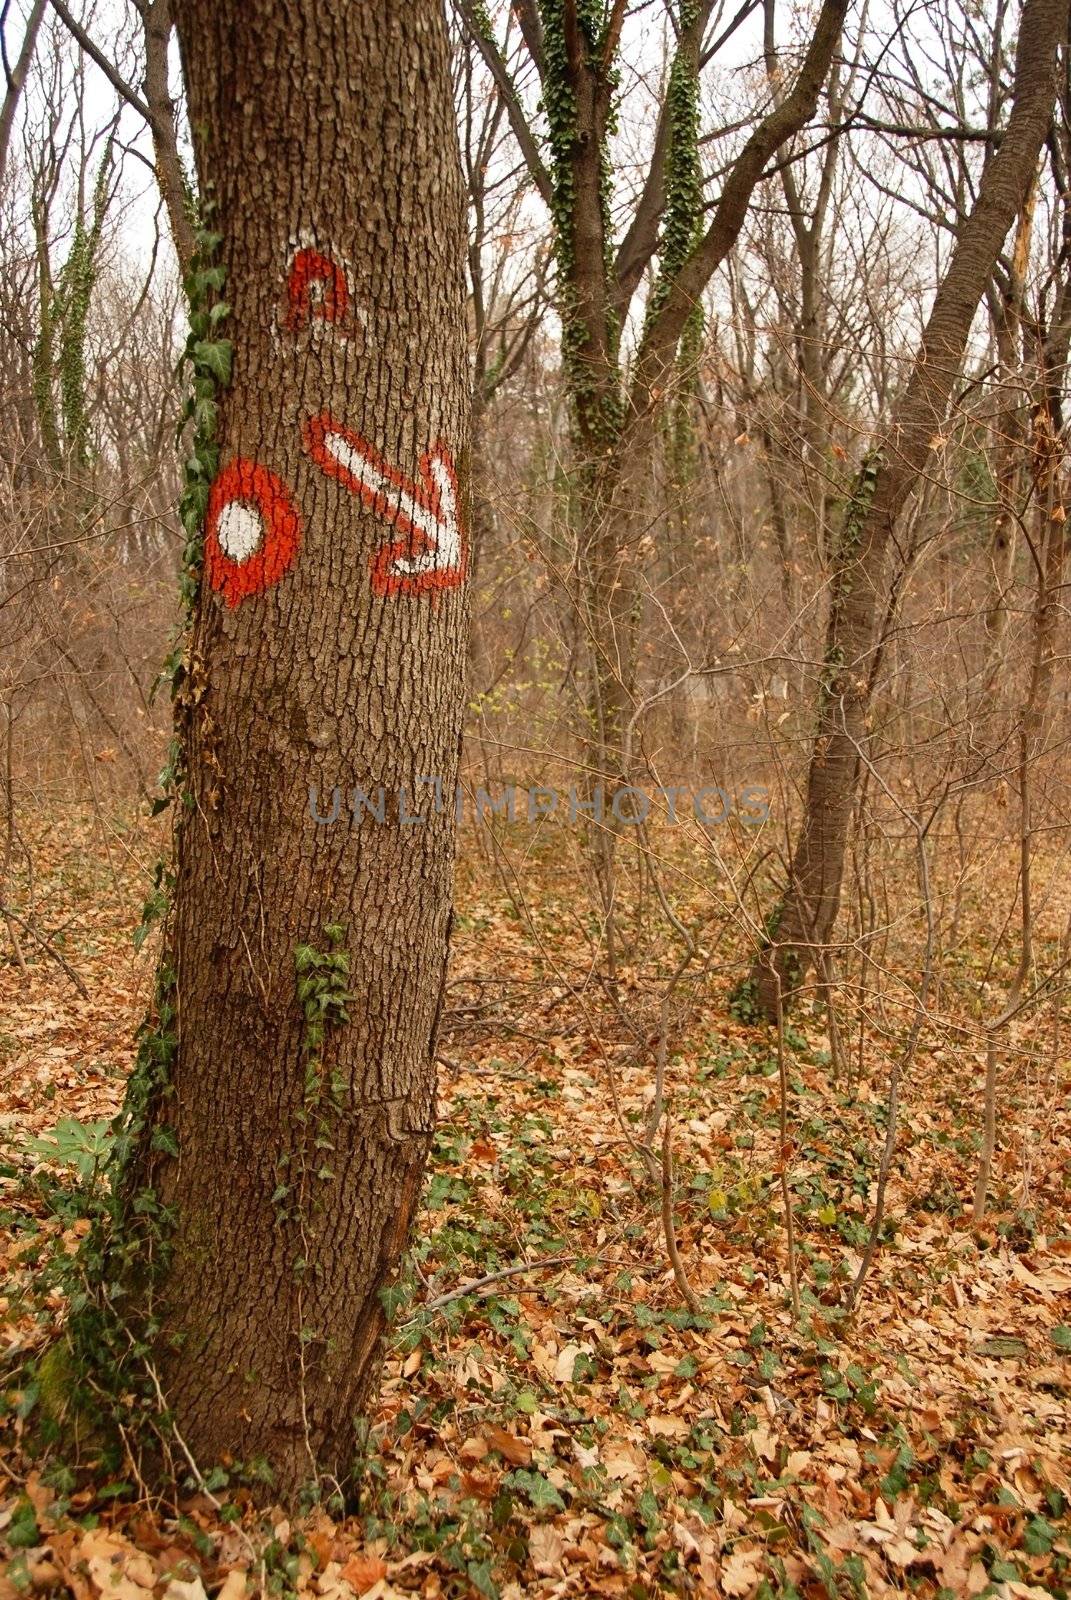 Sign on tree in forest by simply